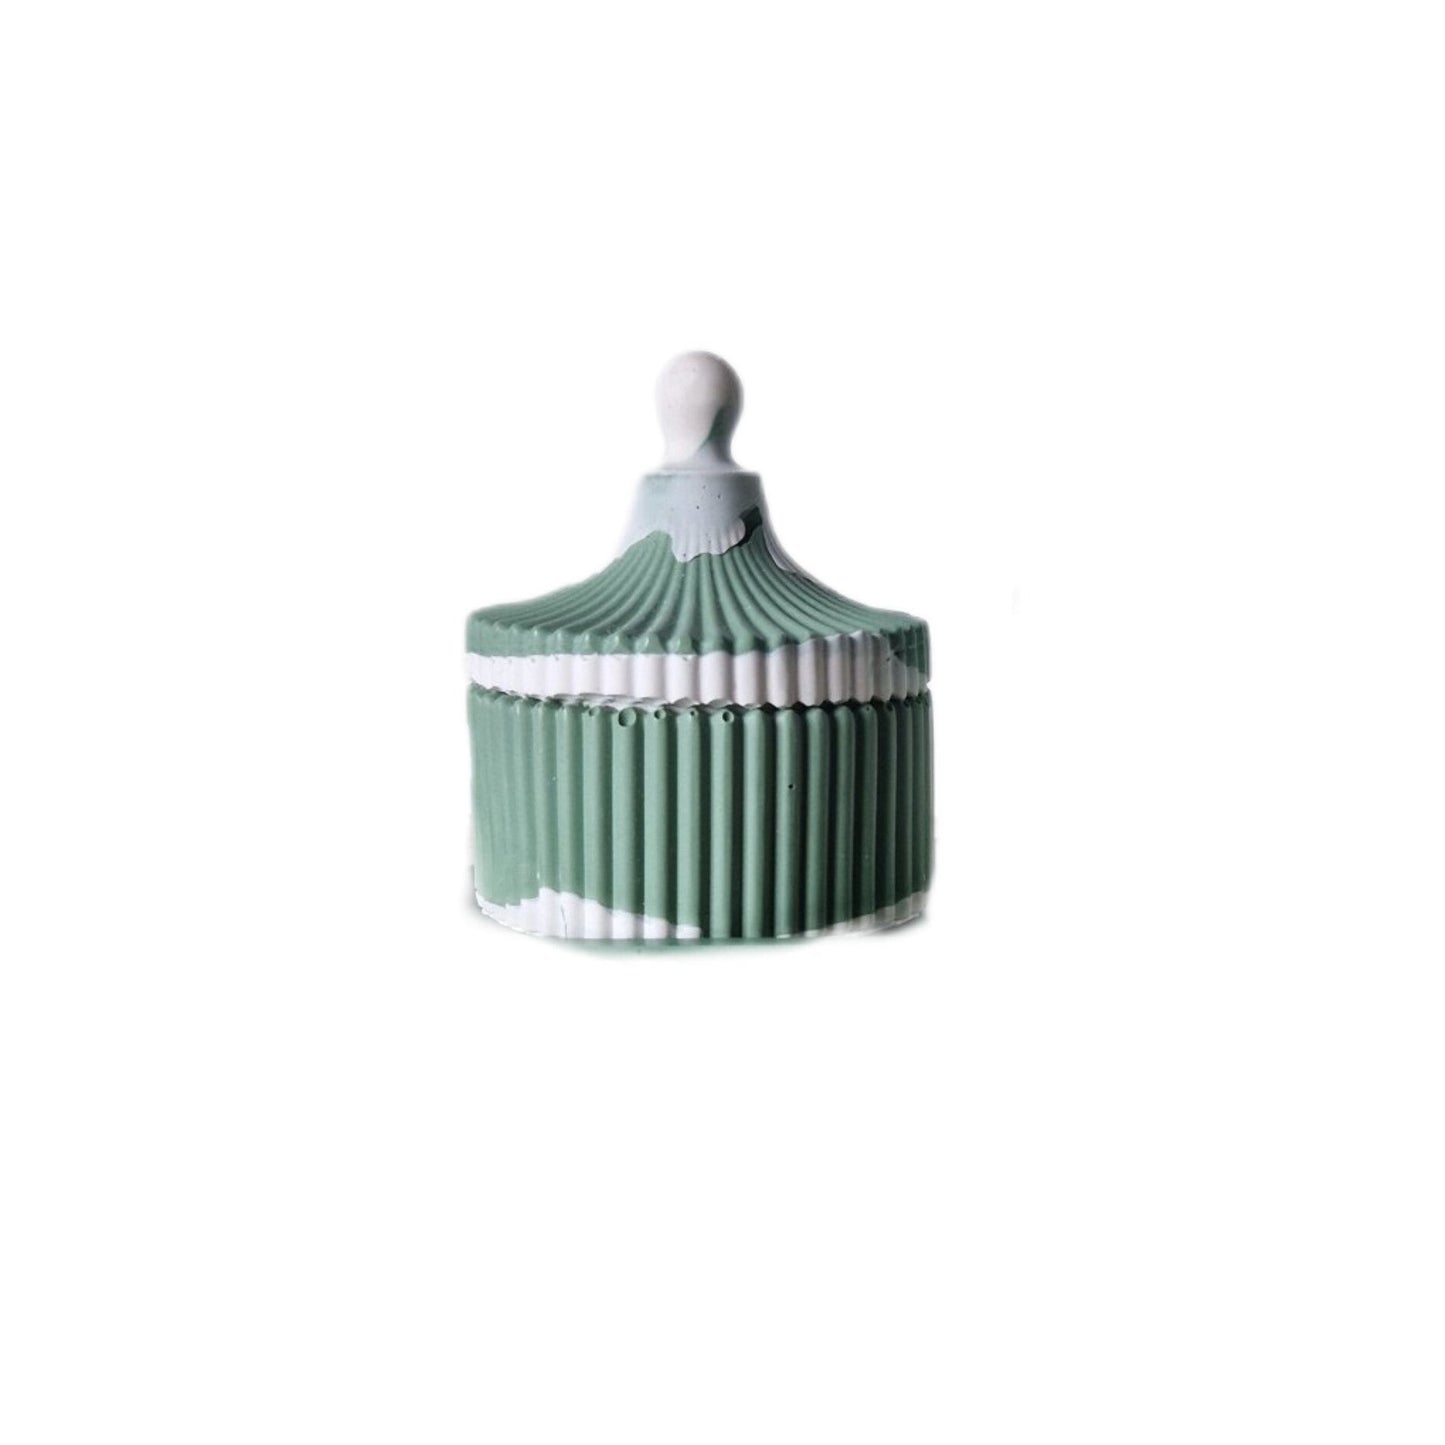 Paris Green and White Ribbed Trinket Pot with Lid